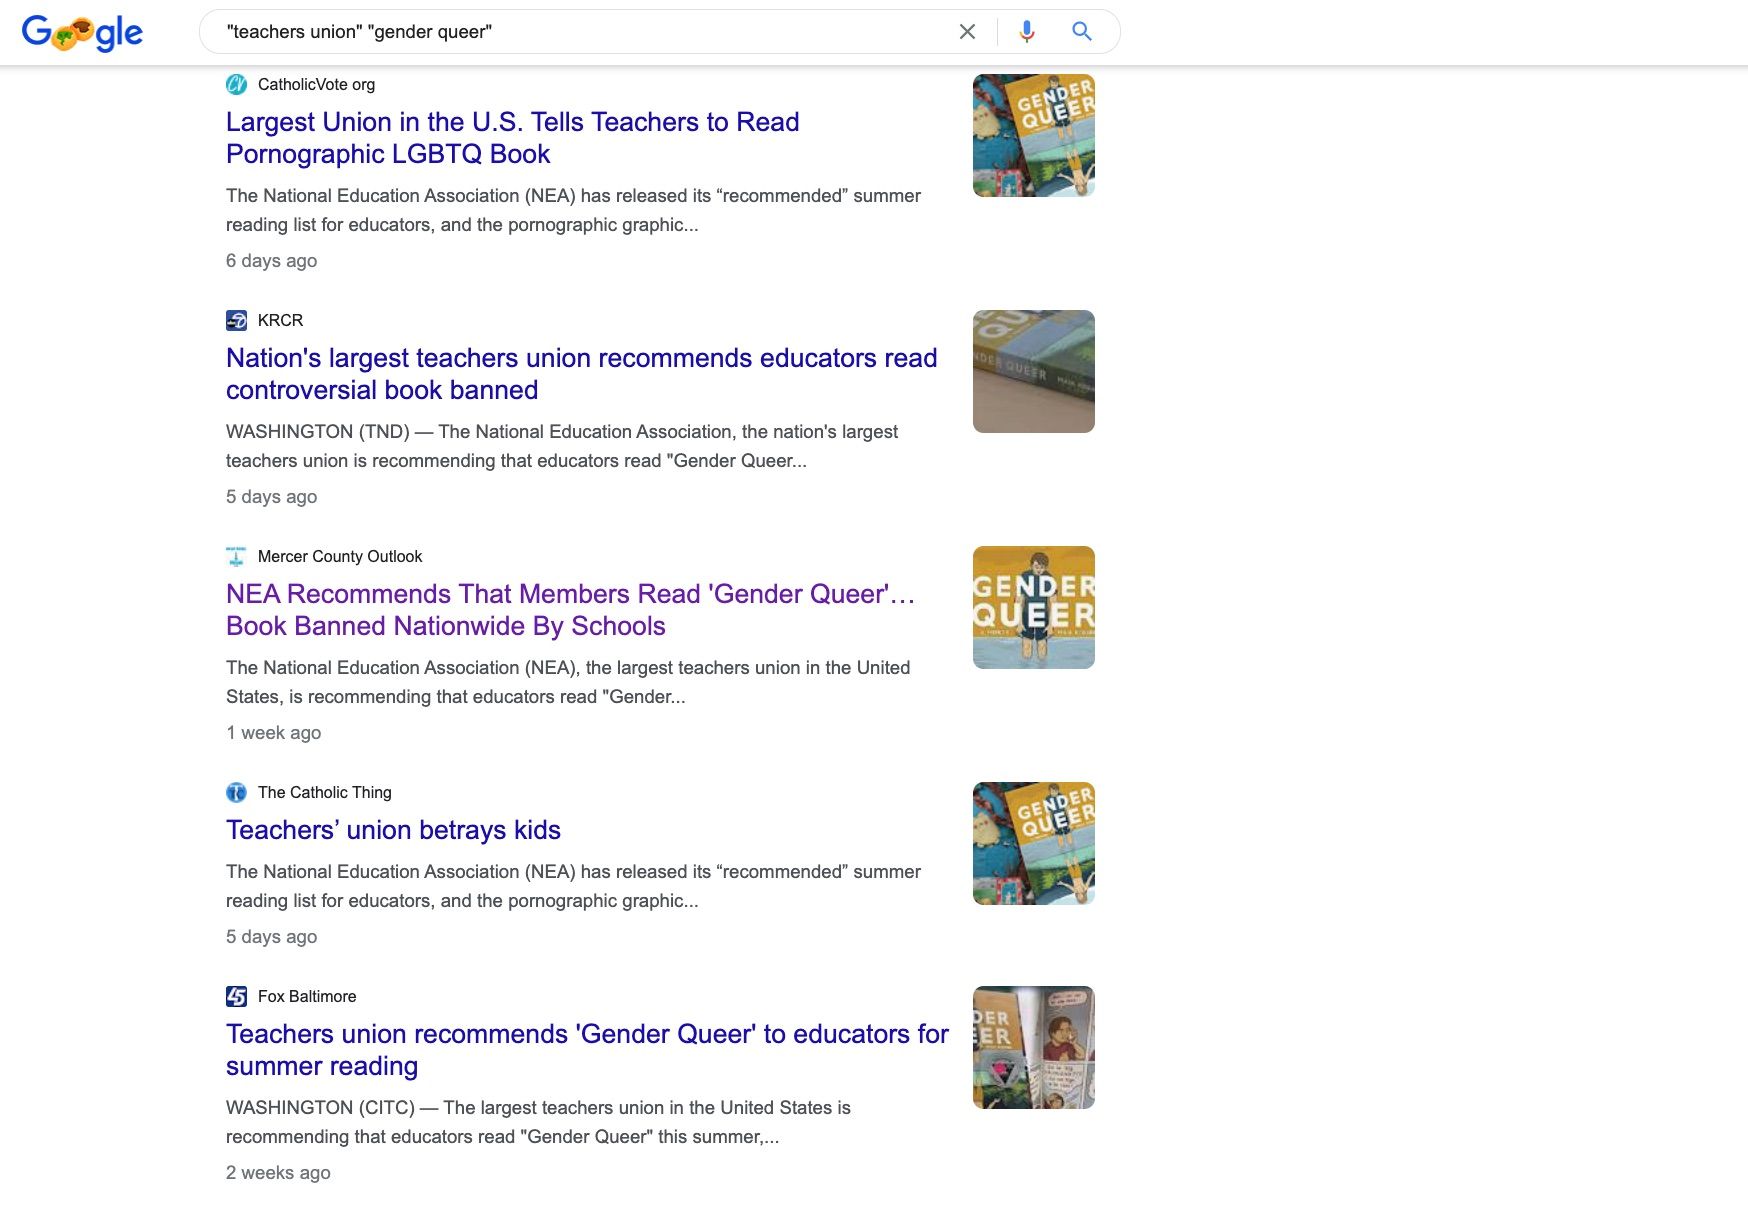 Google search results for "teachers union" and "gender queer."